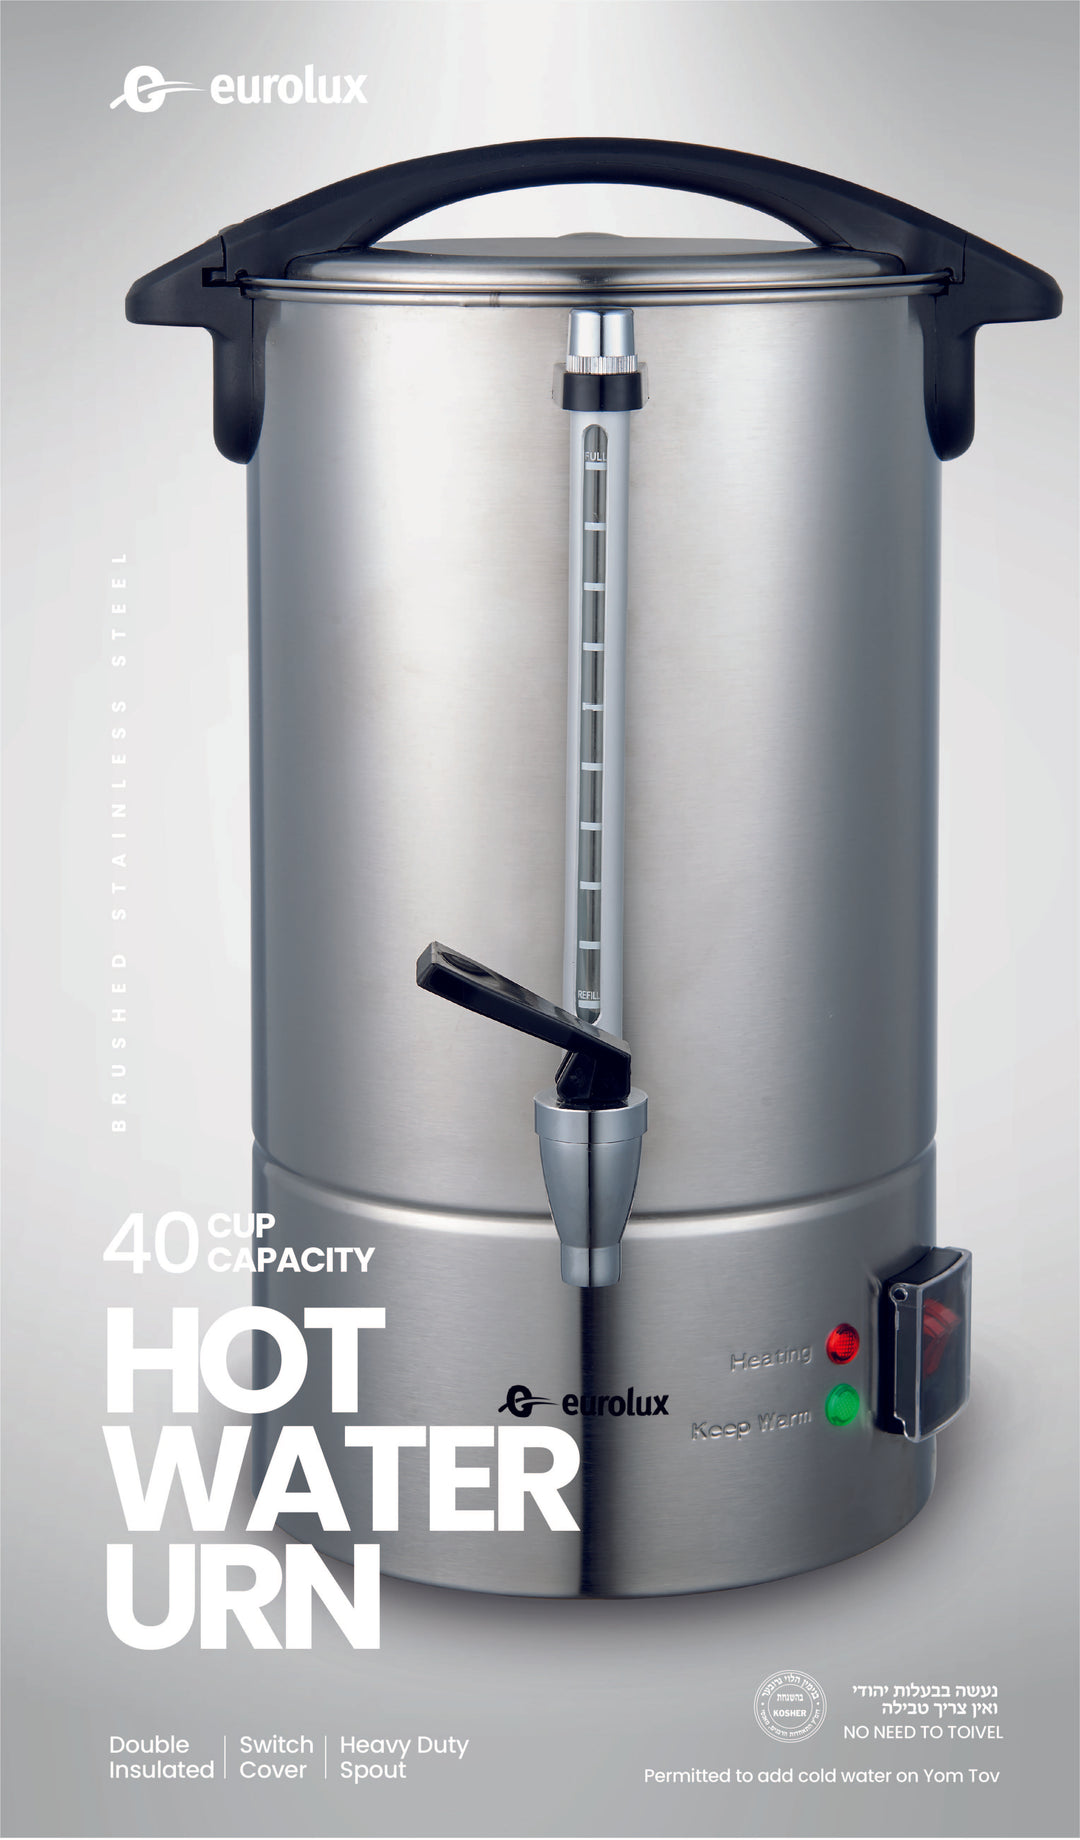 Eurolux Double Insulated Hot Water Urn 40 Cup